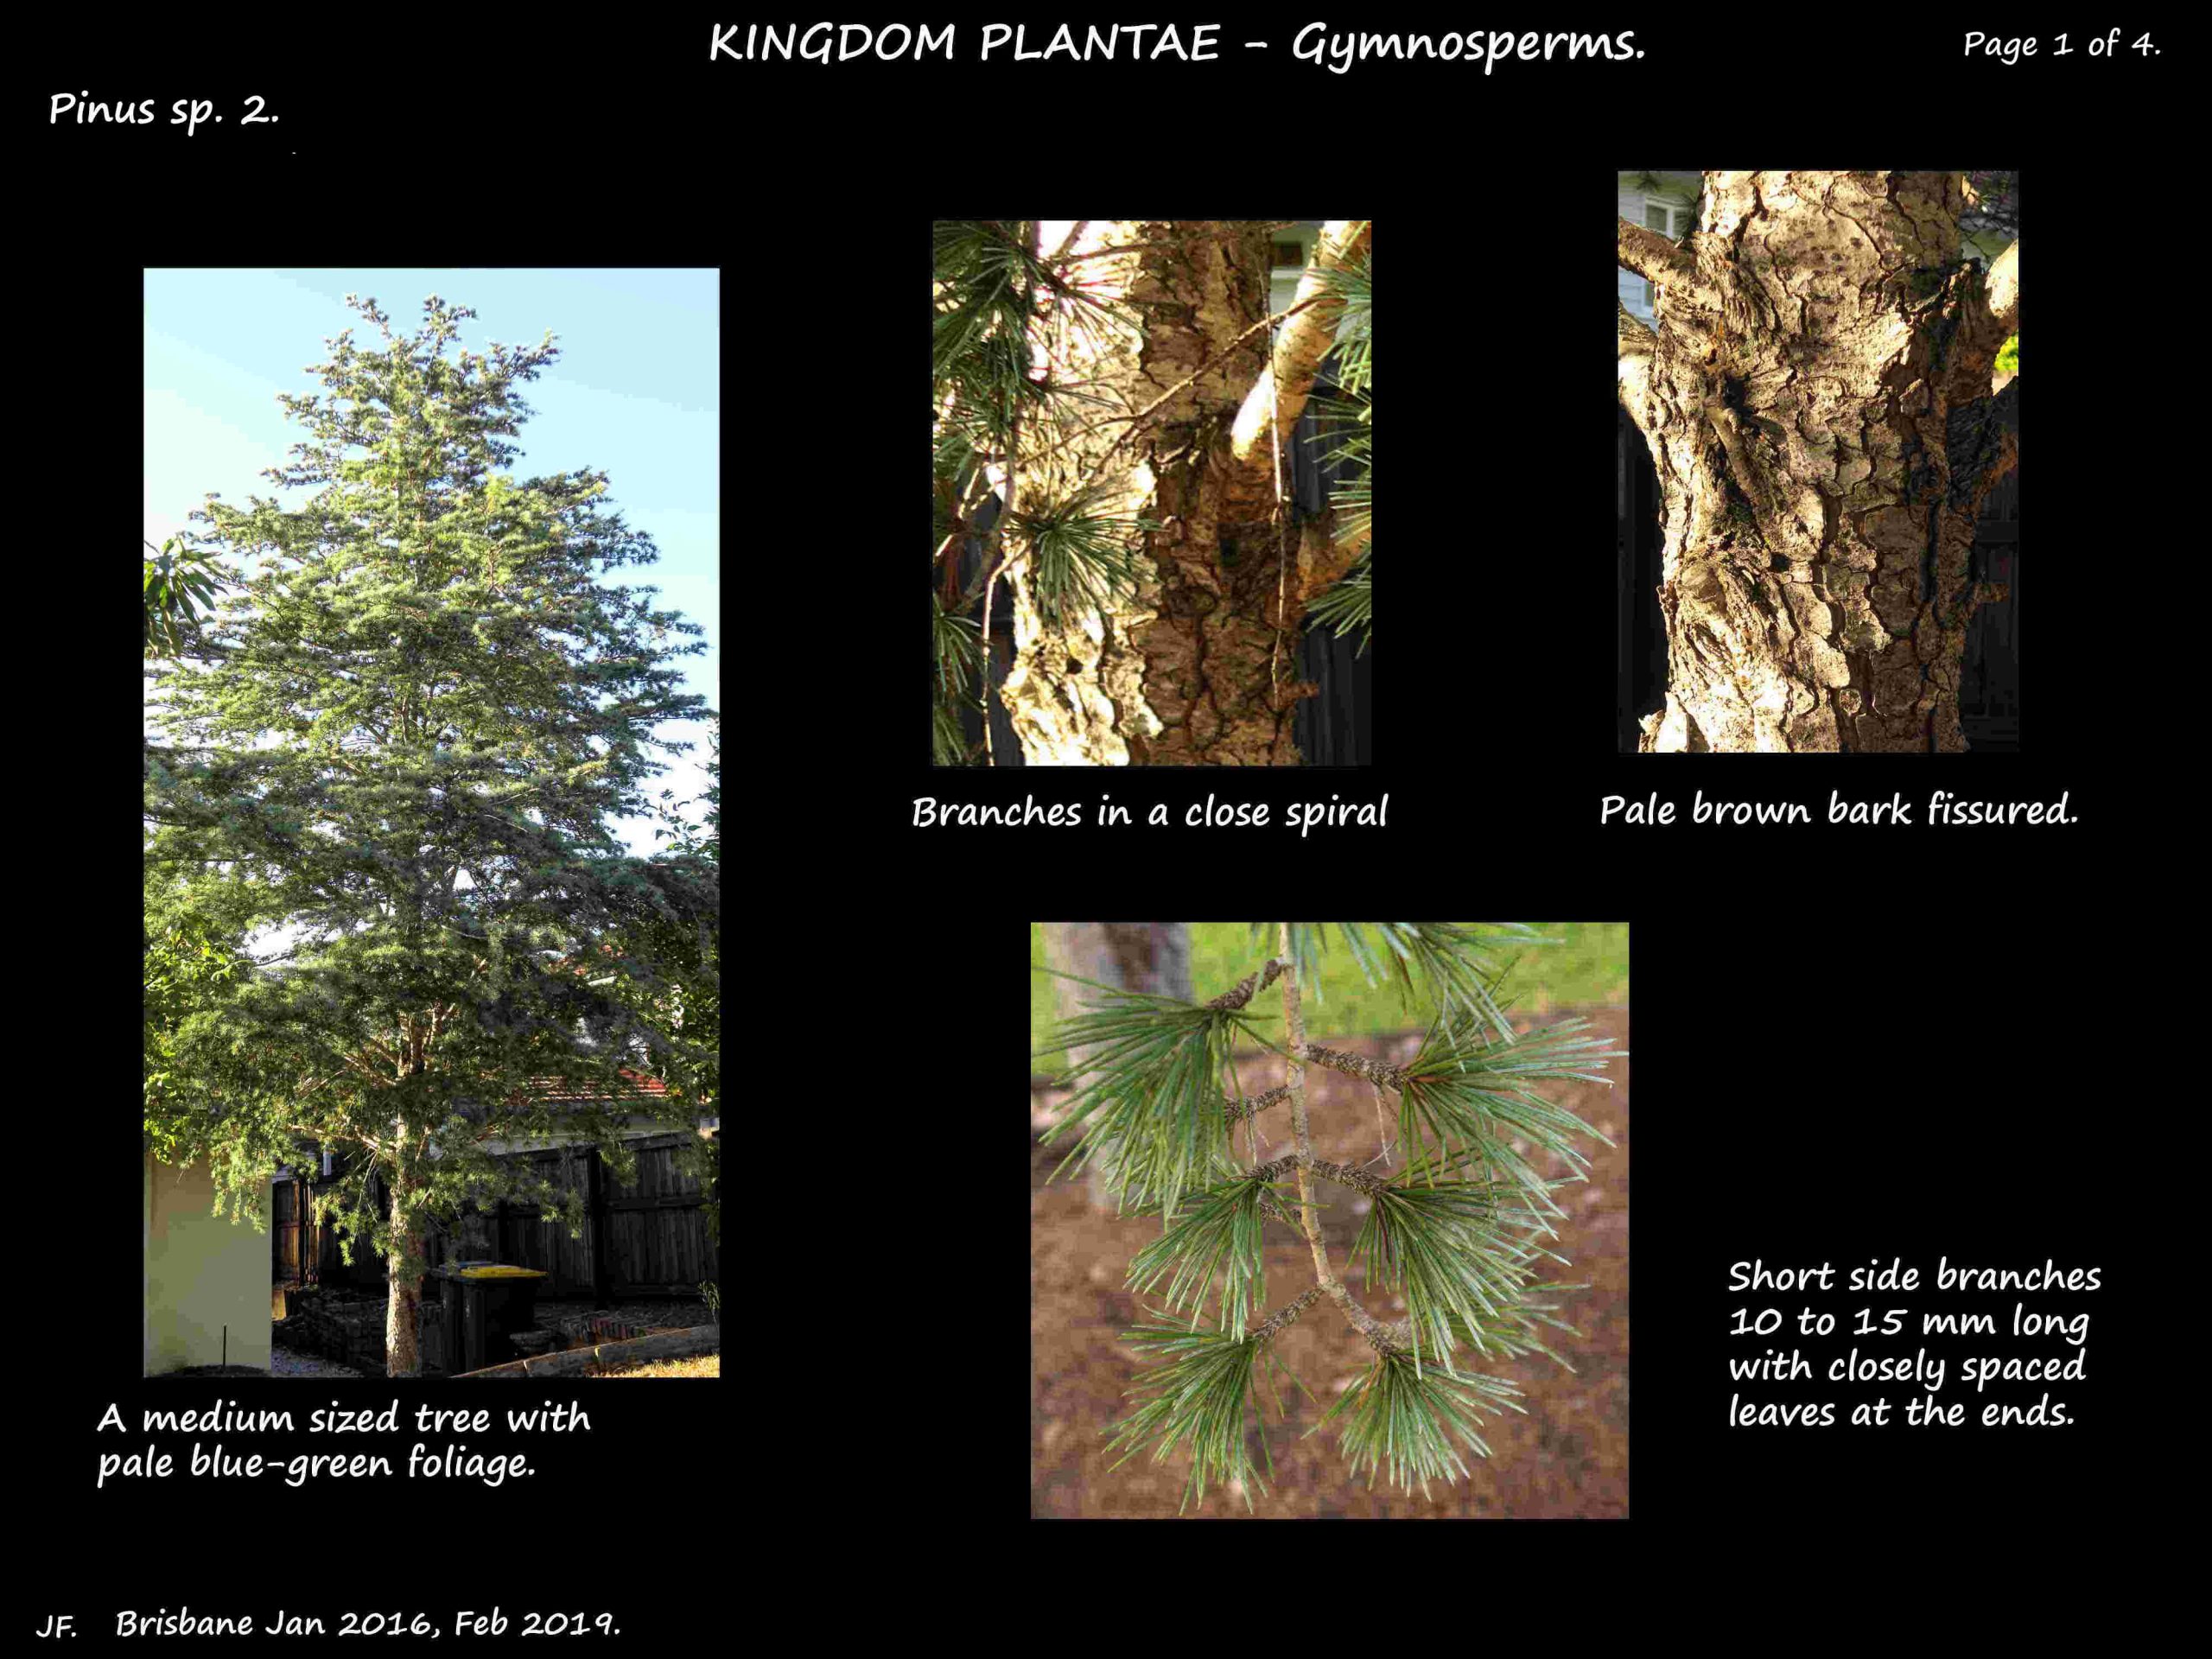 1 Pinus tree, bark & side branches